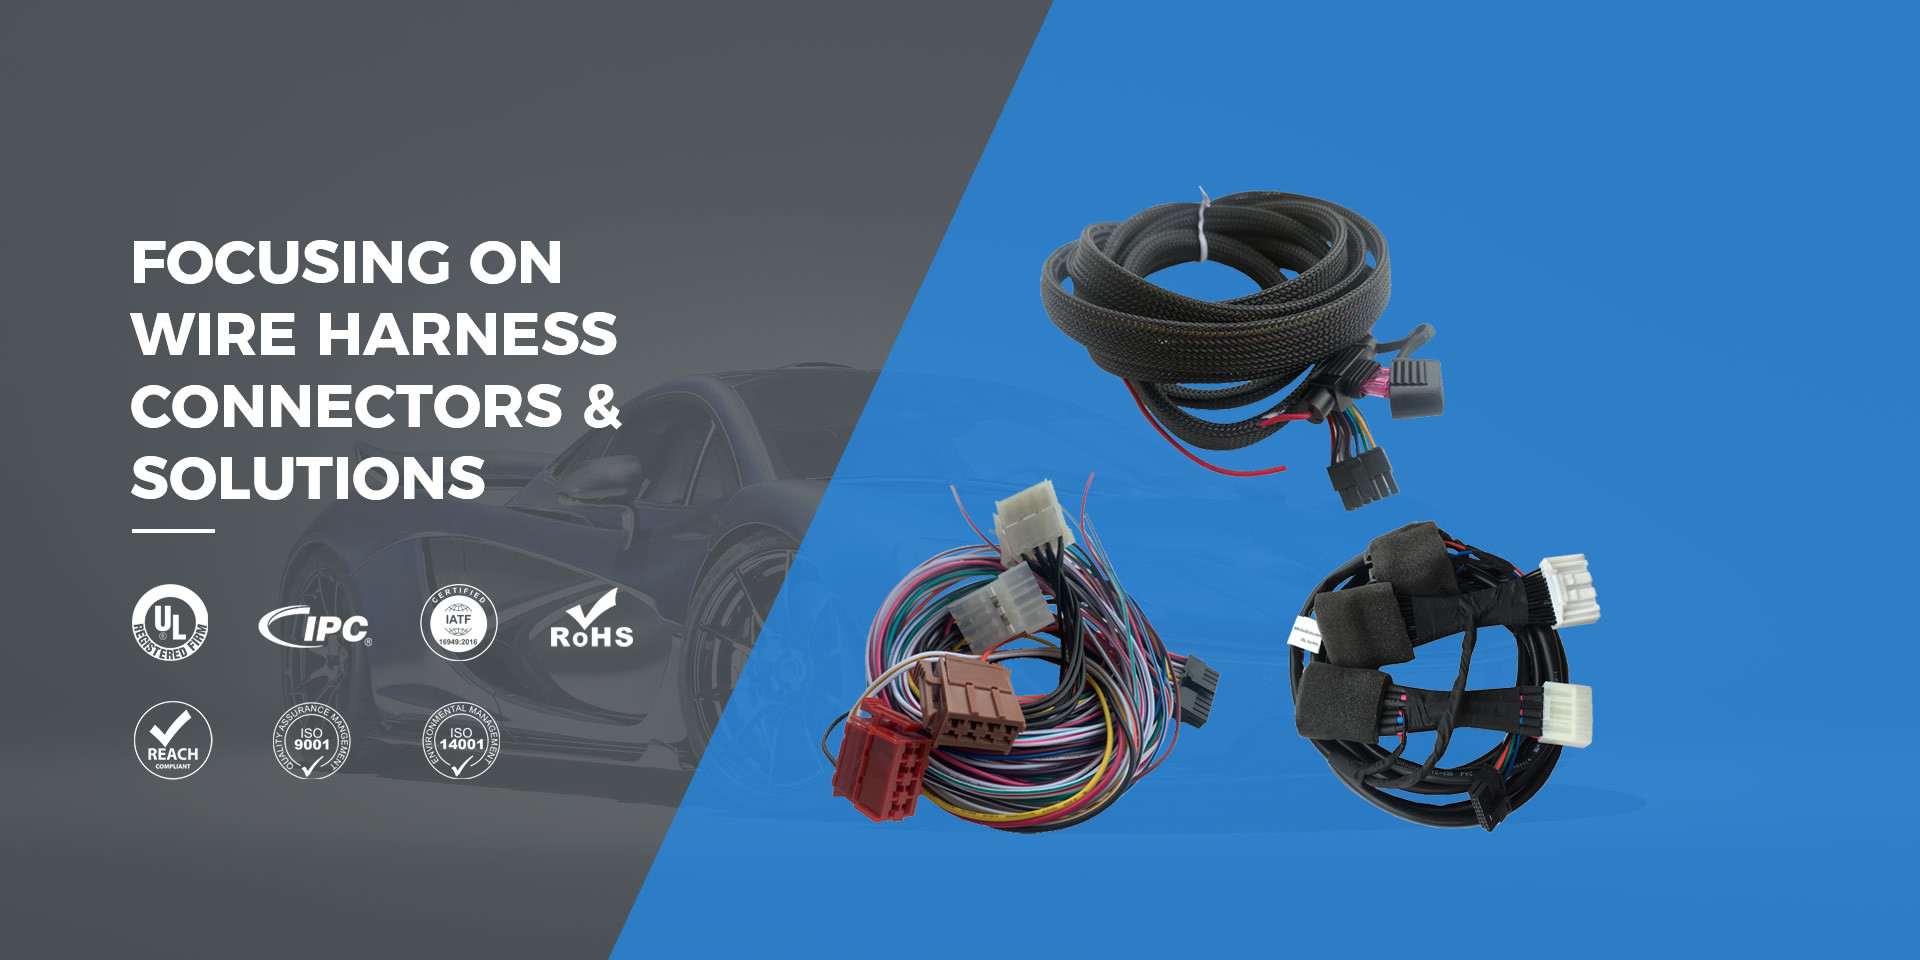 Focusing on wire harness connectors & solutions